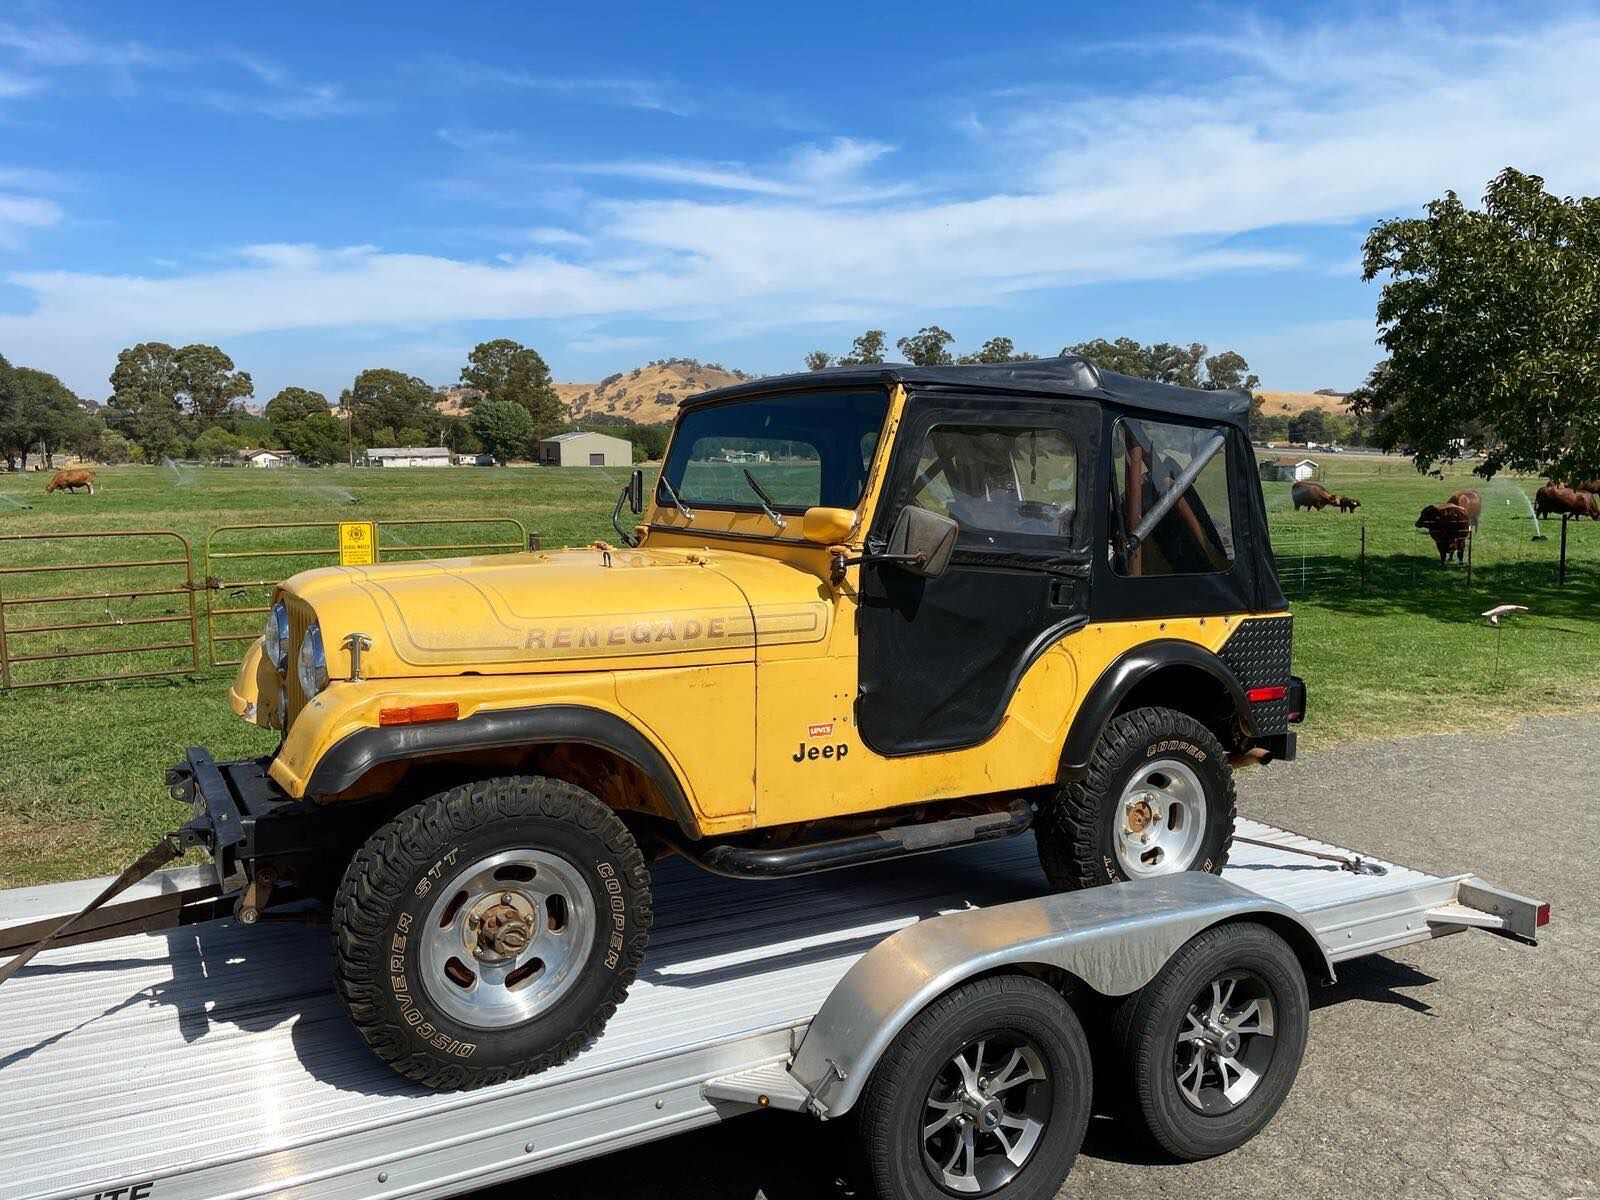 1975 Jeep - SOLD